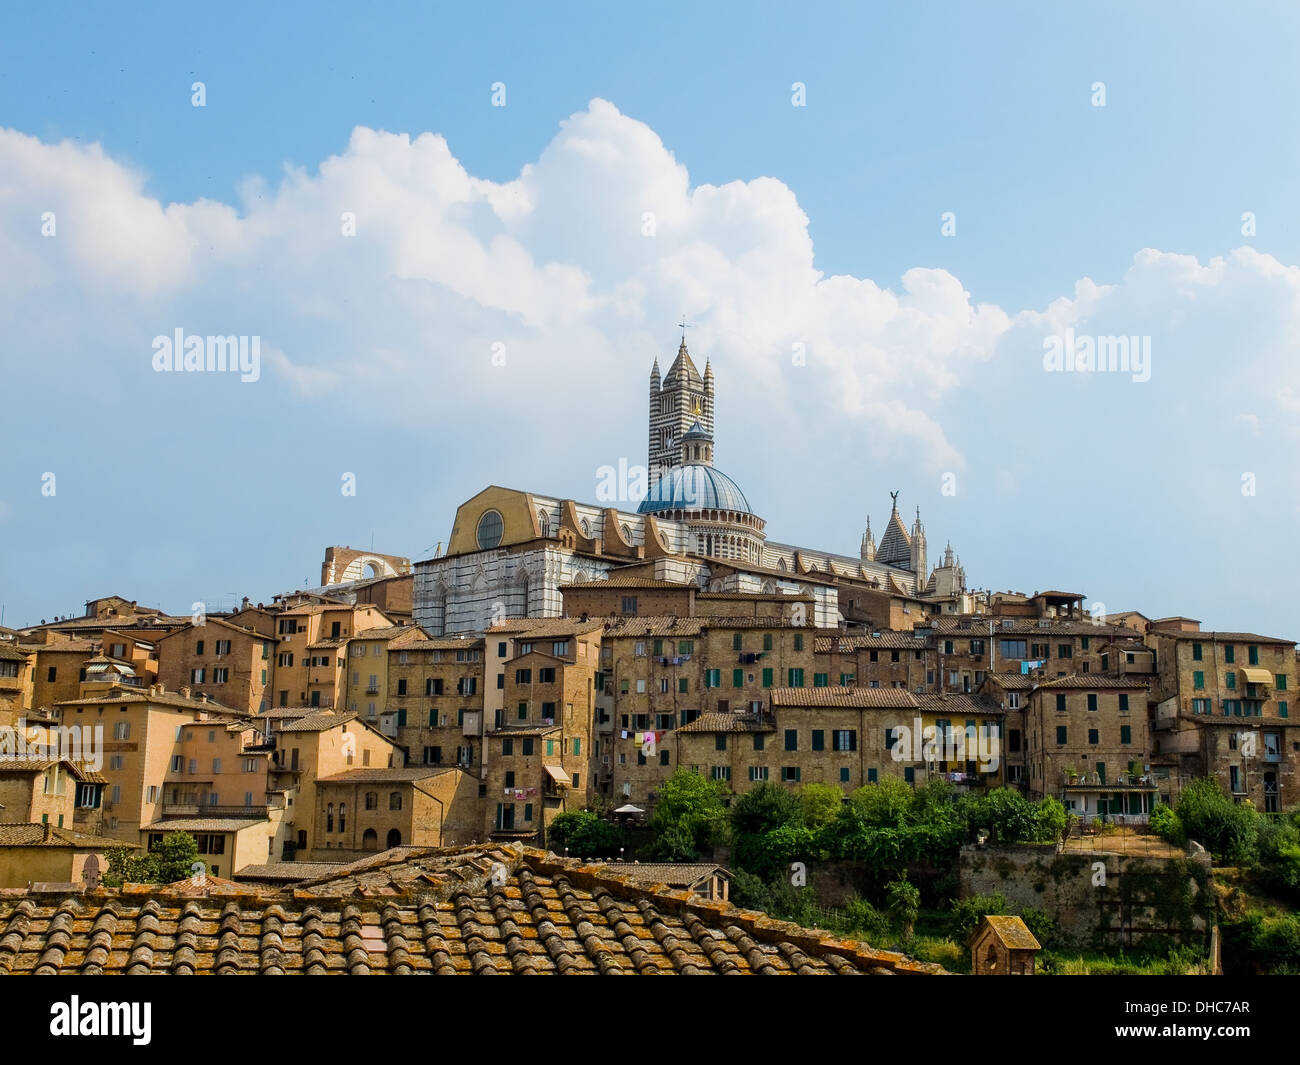 Siena view with the Duomo in top. Siena, Italy Stock Photo